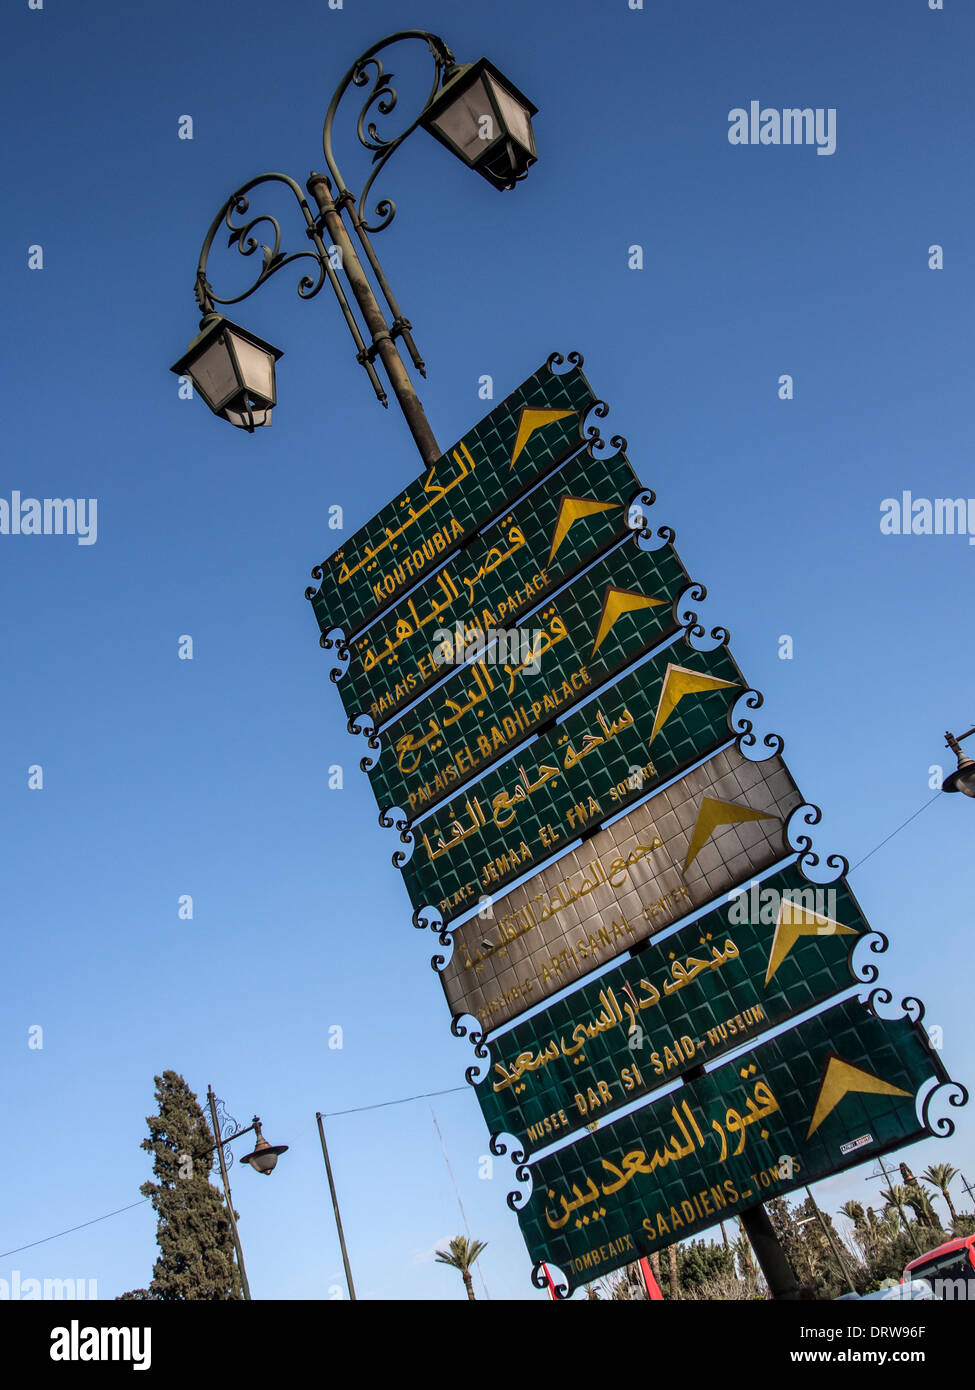 MARRAKECH, MOROCCO - JANUARY 21, 2014: Road direction Signs Stock Photo